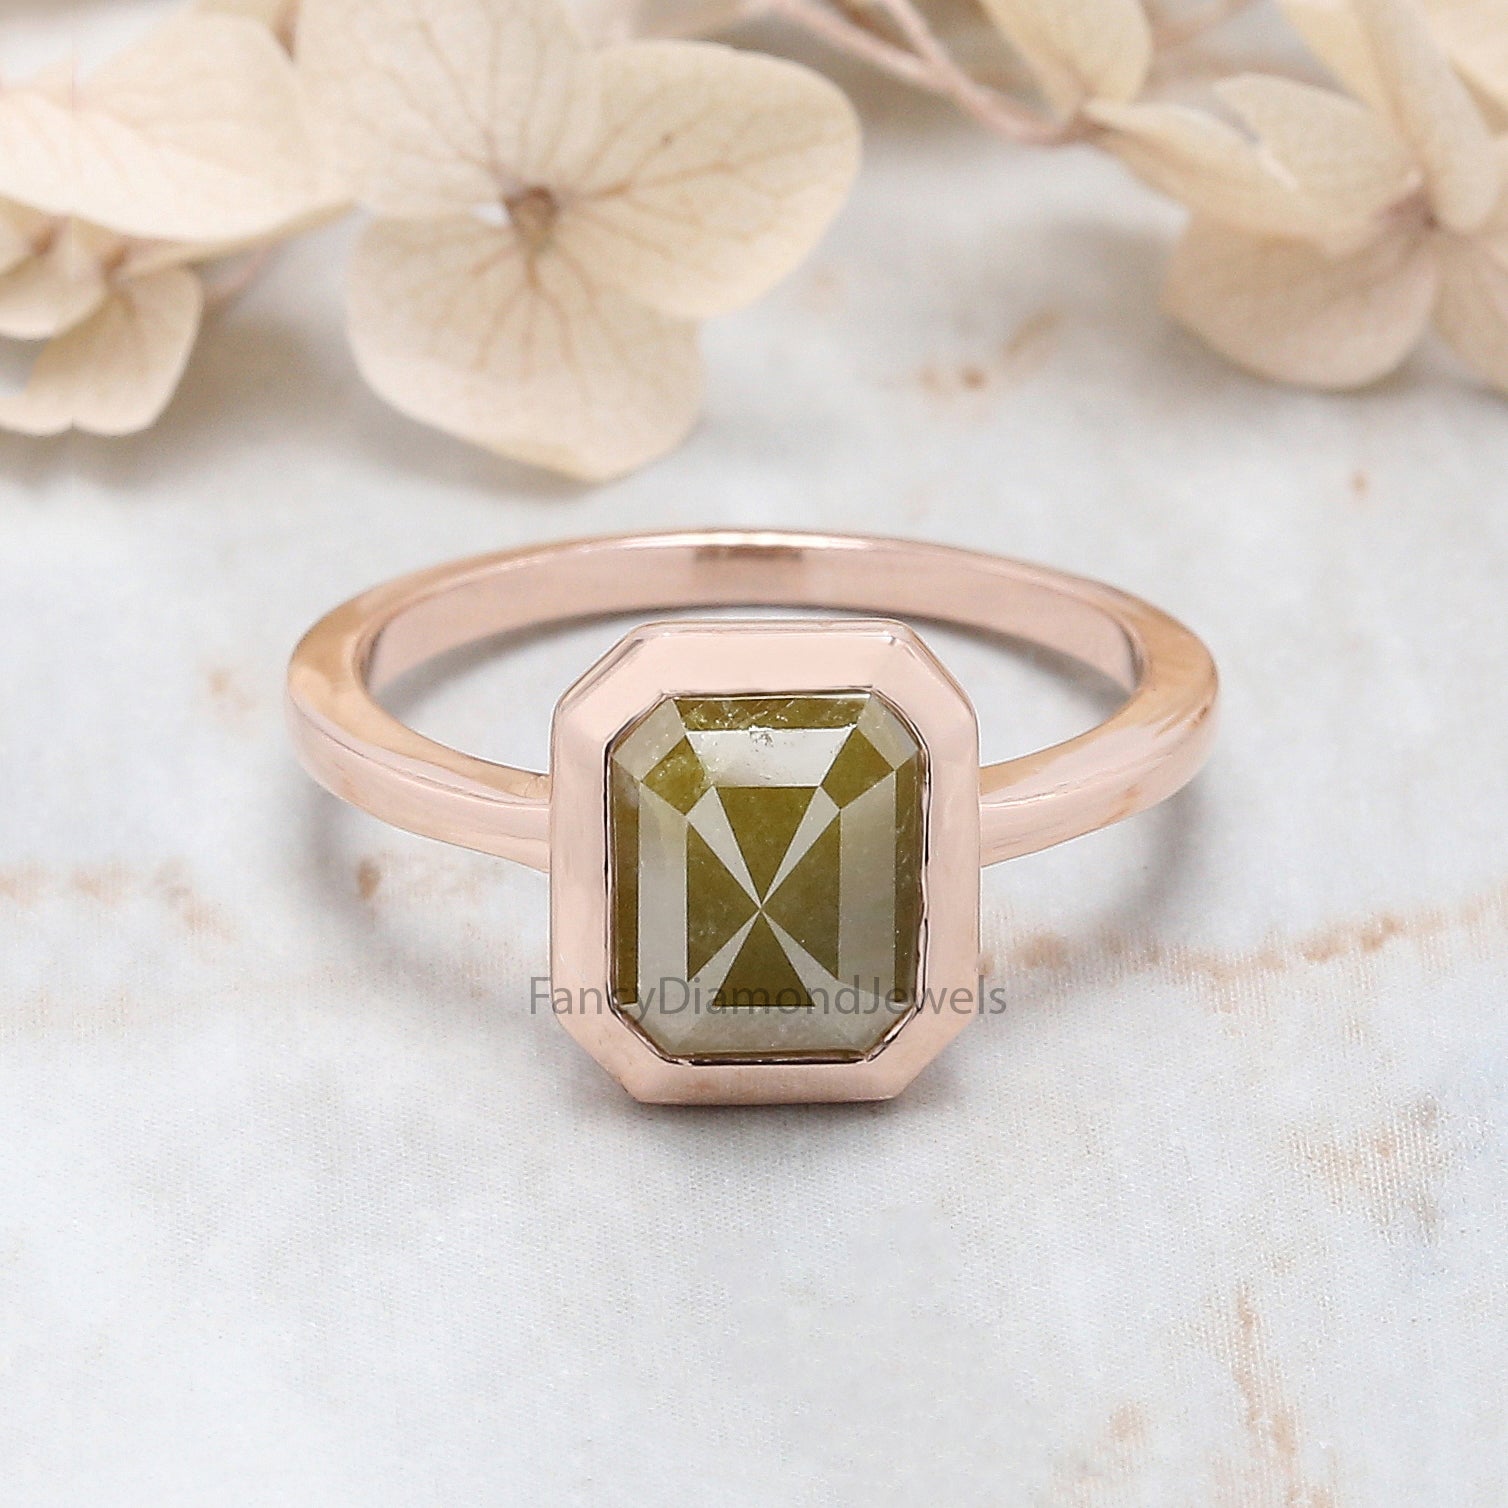 Emerald Cut Yellow Color Diamond Ring 2.85 Ct 8.60 MM Emerald Shape Diamond Ring 14K Rose Gold Silver Engagement Ring Gift For Her QN157